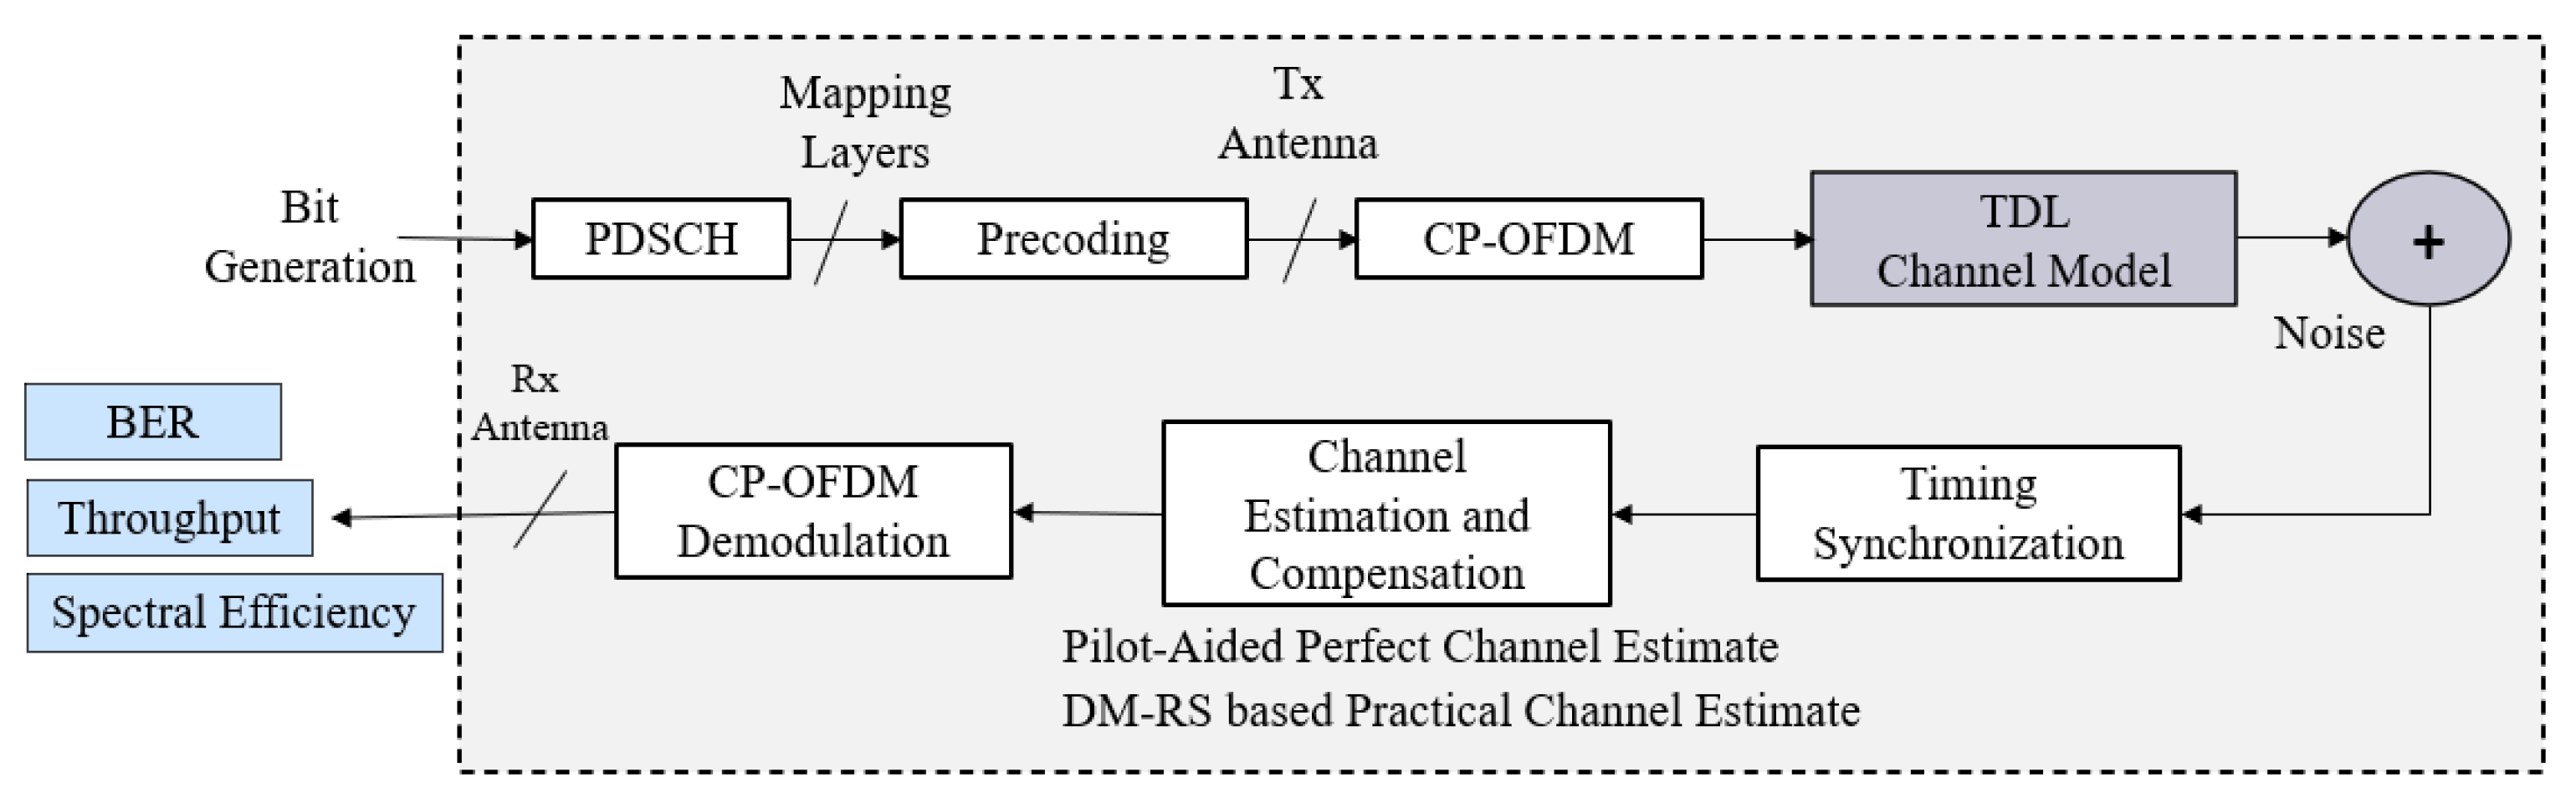 5G NR Physical Downlink Shared Channel (PDSCH) Video - MATLAB